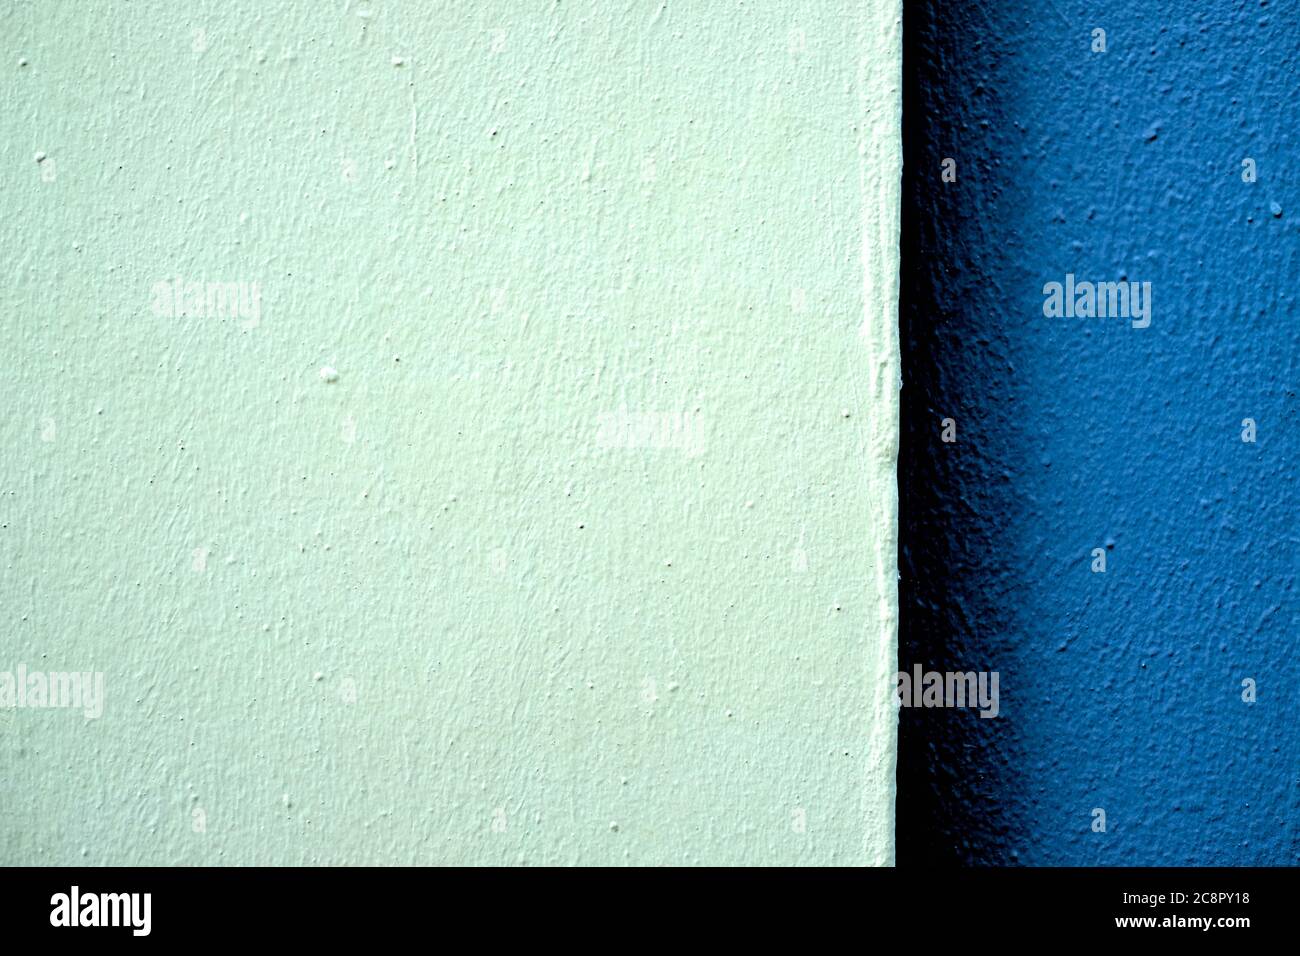 Two tones of blue color bands on a freshly painted wall in hard light, offset with large ligher part. Stock Photo